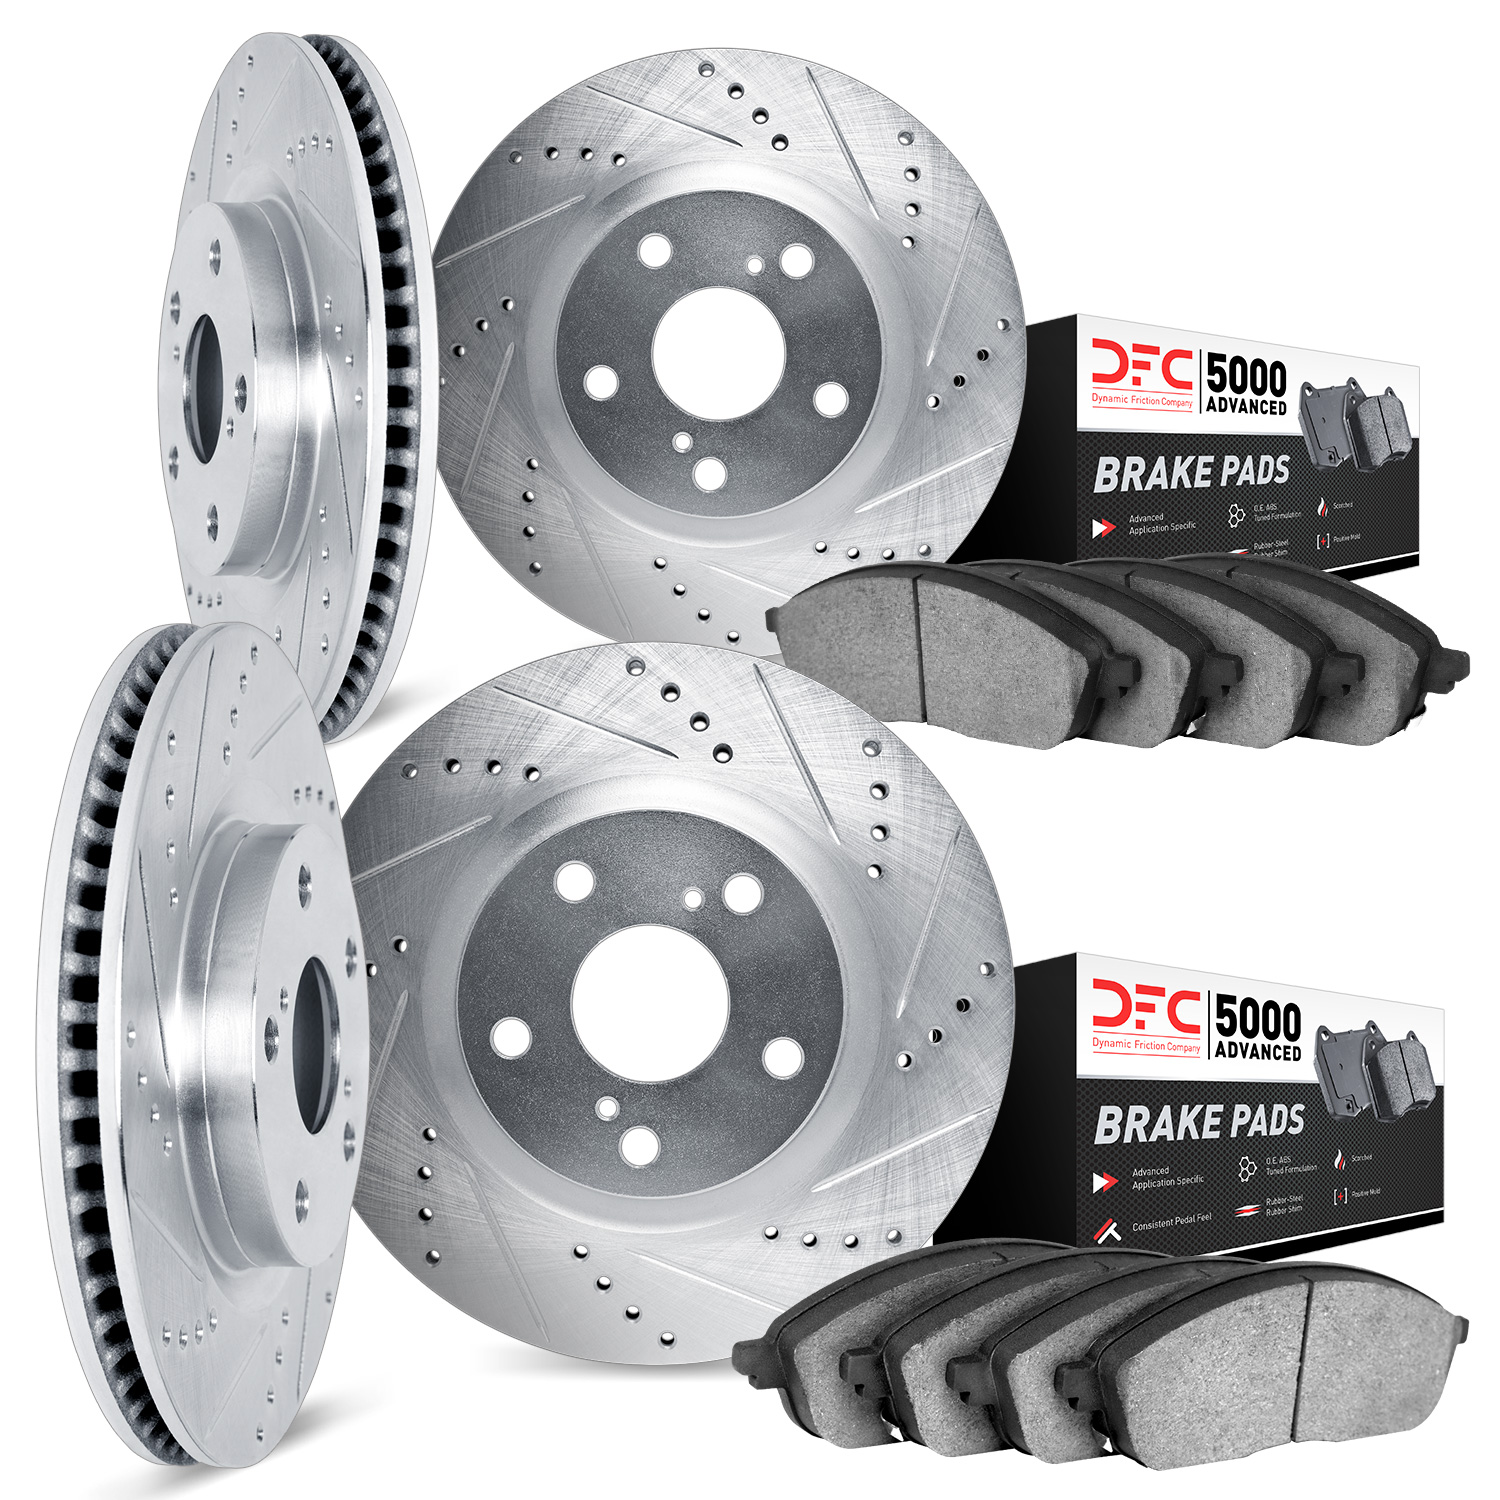 7504-20013 Drilled/Slotted Brake Rotors w/5000 Advanced Brake Pads Kit [Silver], 2017-2020 Jaguar, Position: Front and Rear